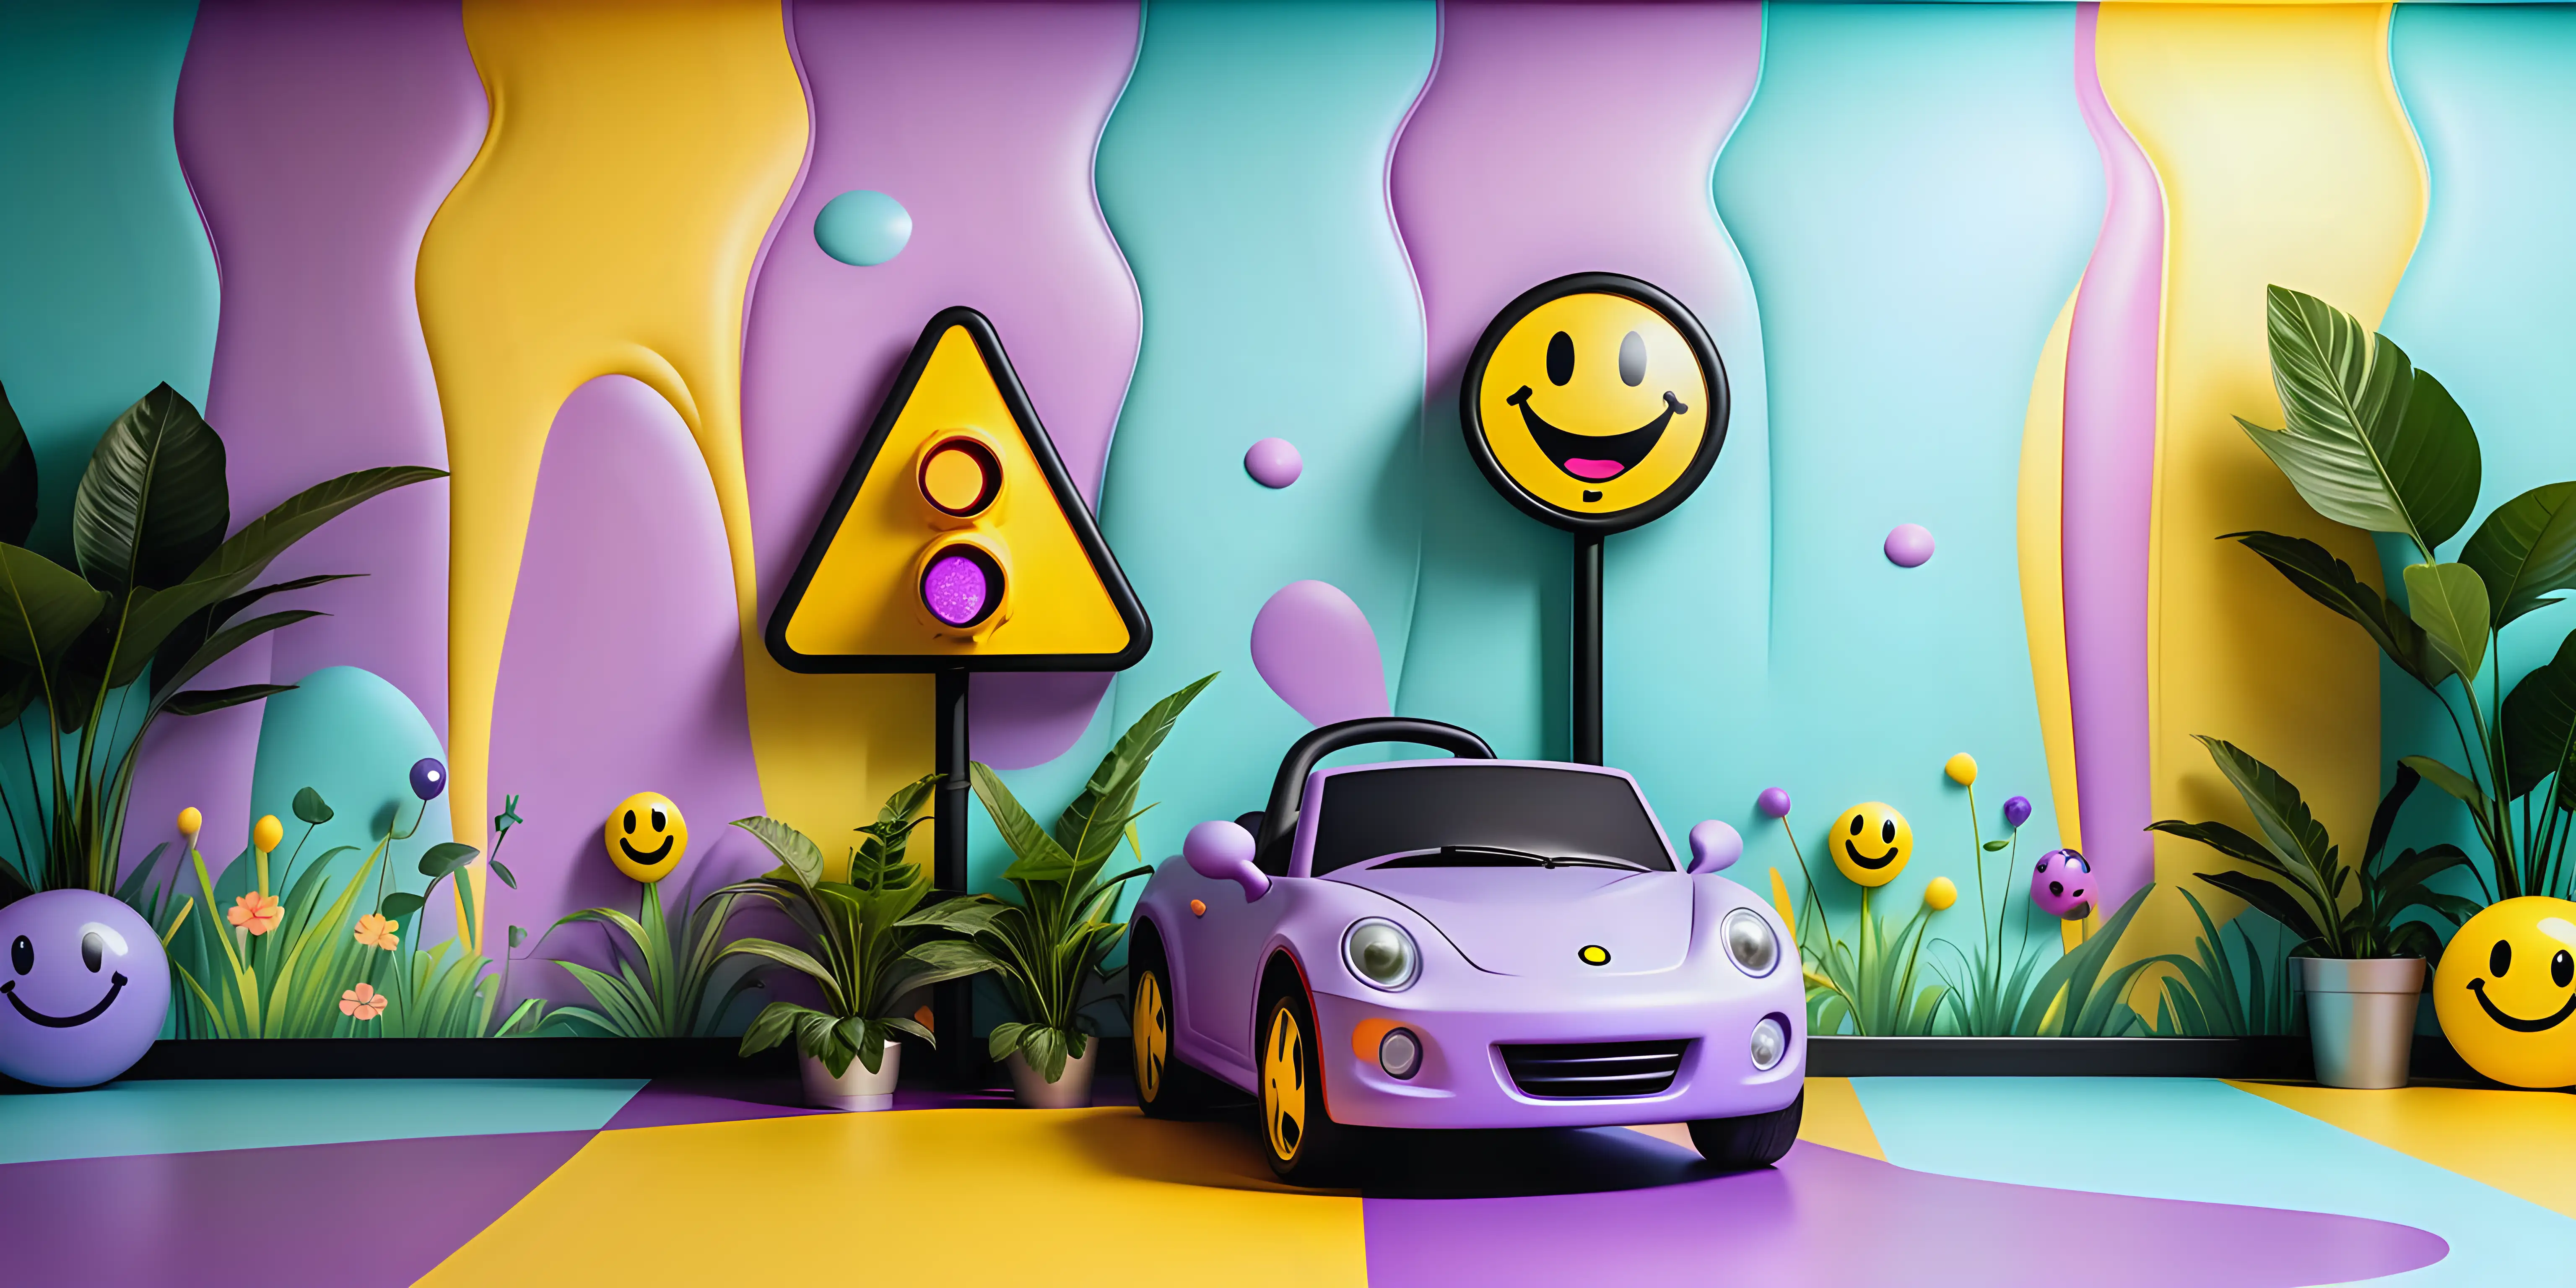 Joyful Cartoon Kids Play Area with Melting Traffic Signal and Smiley Faces